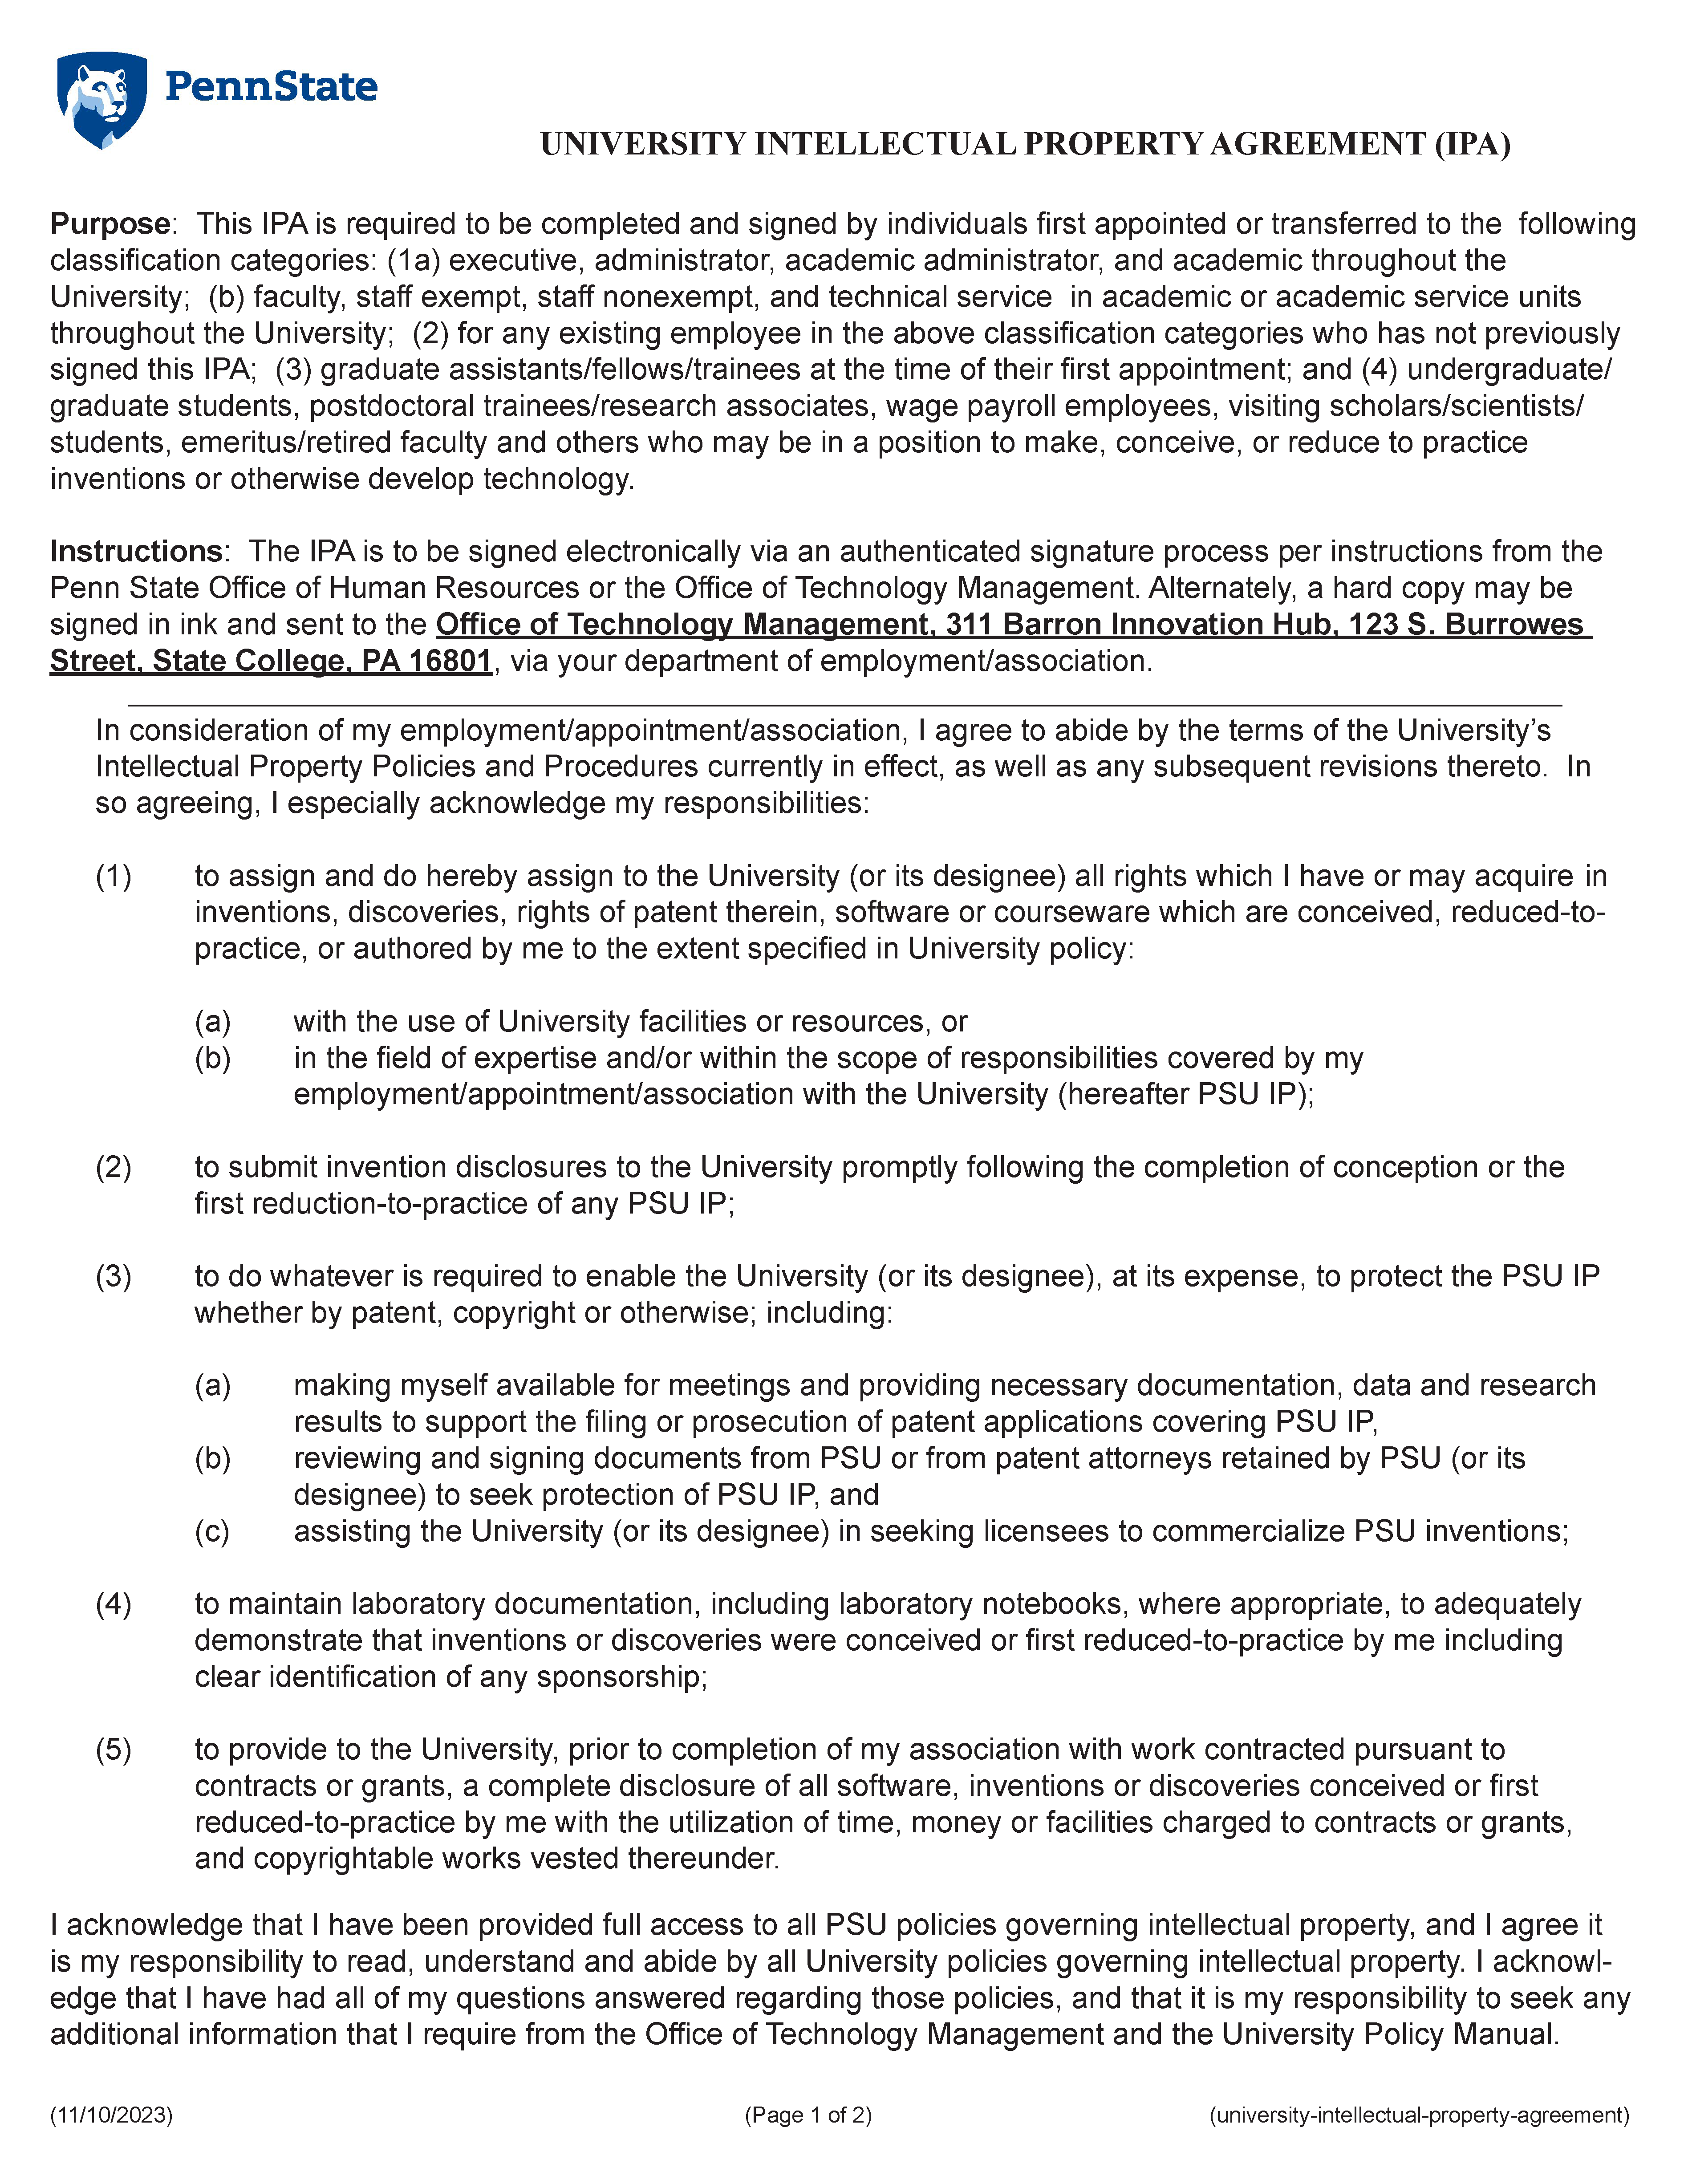 Image of University Intellectual Property Agreement (Page 1)